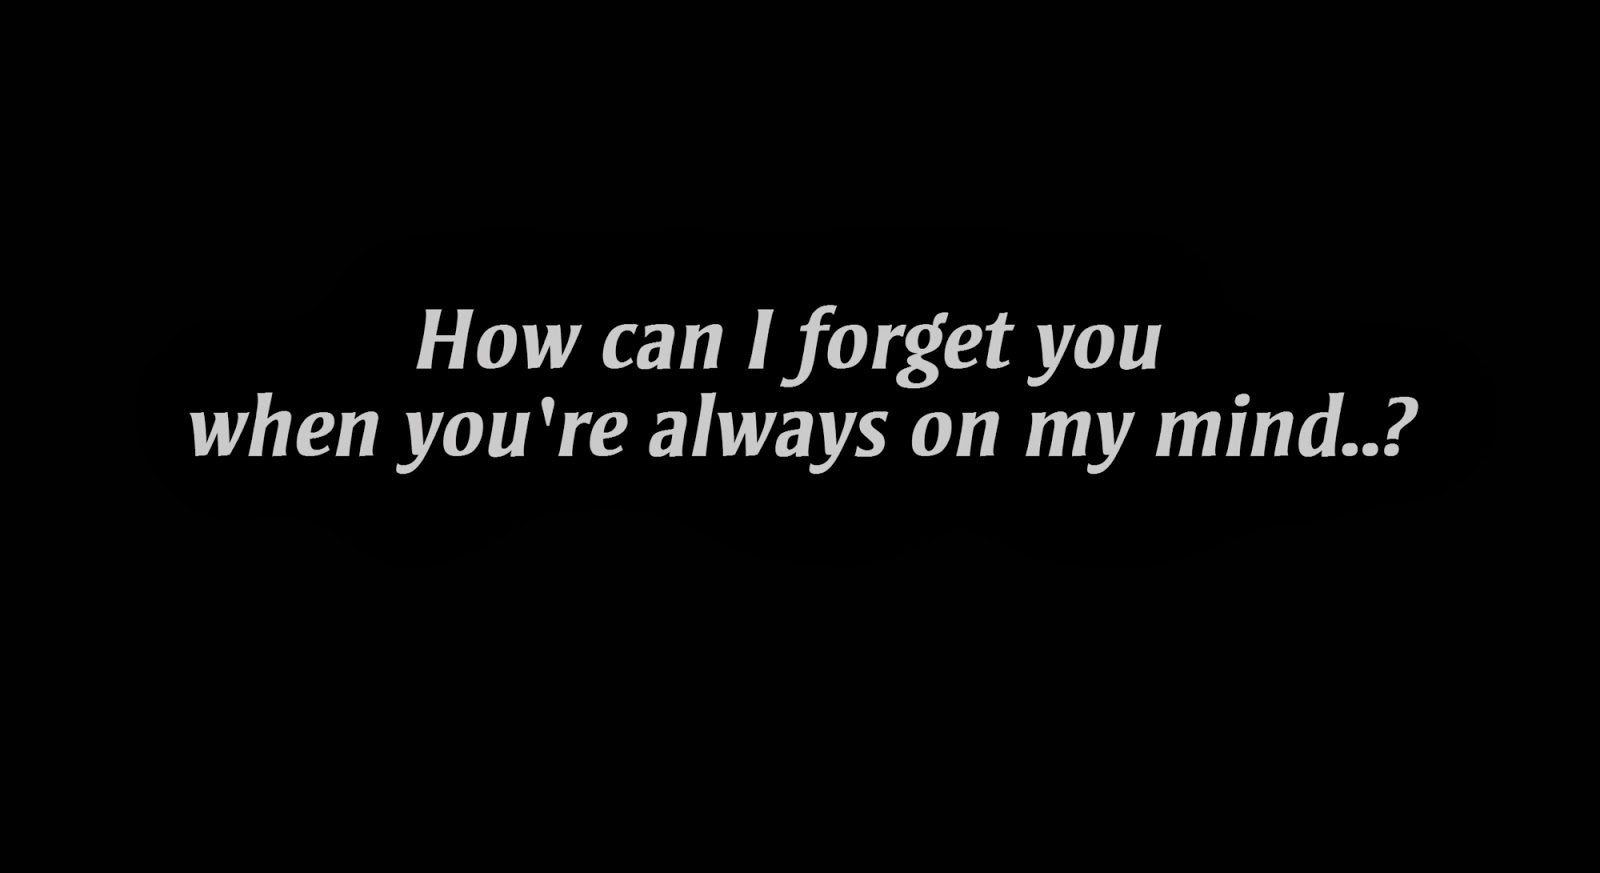 How can I forget you when you're always on my mind